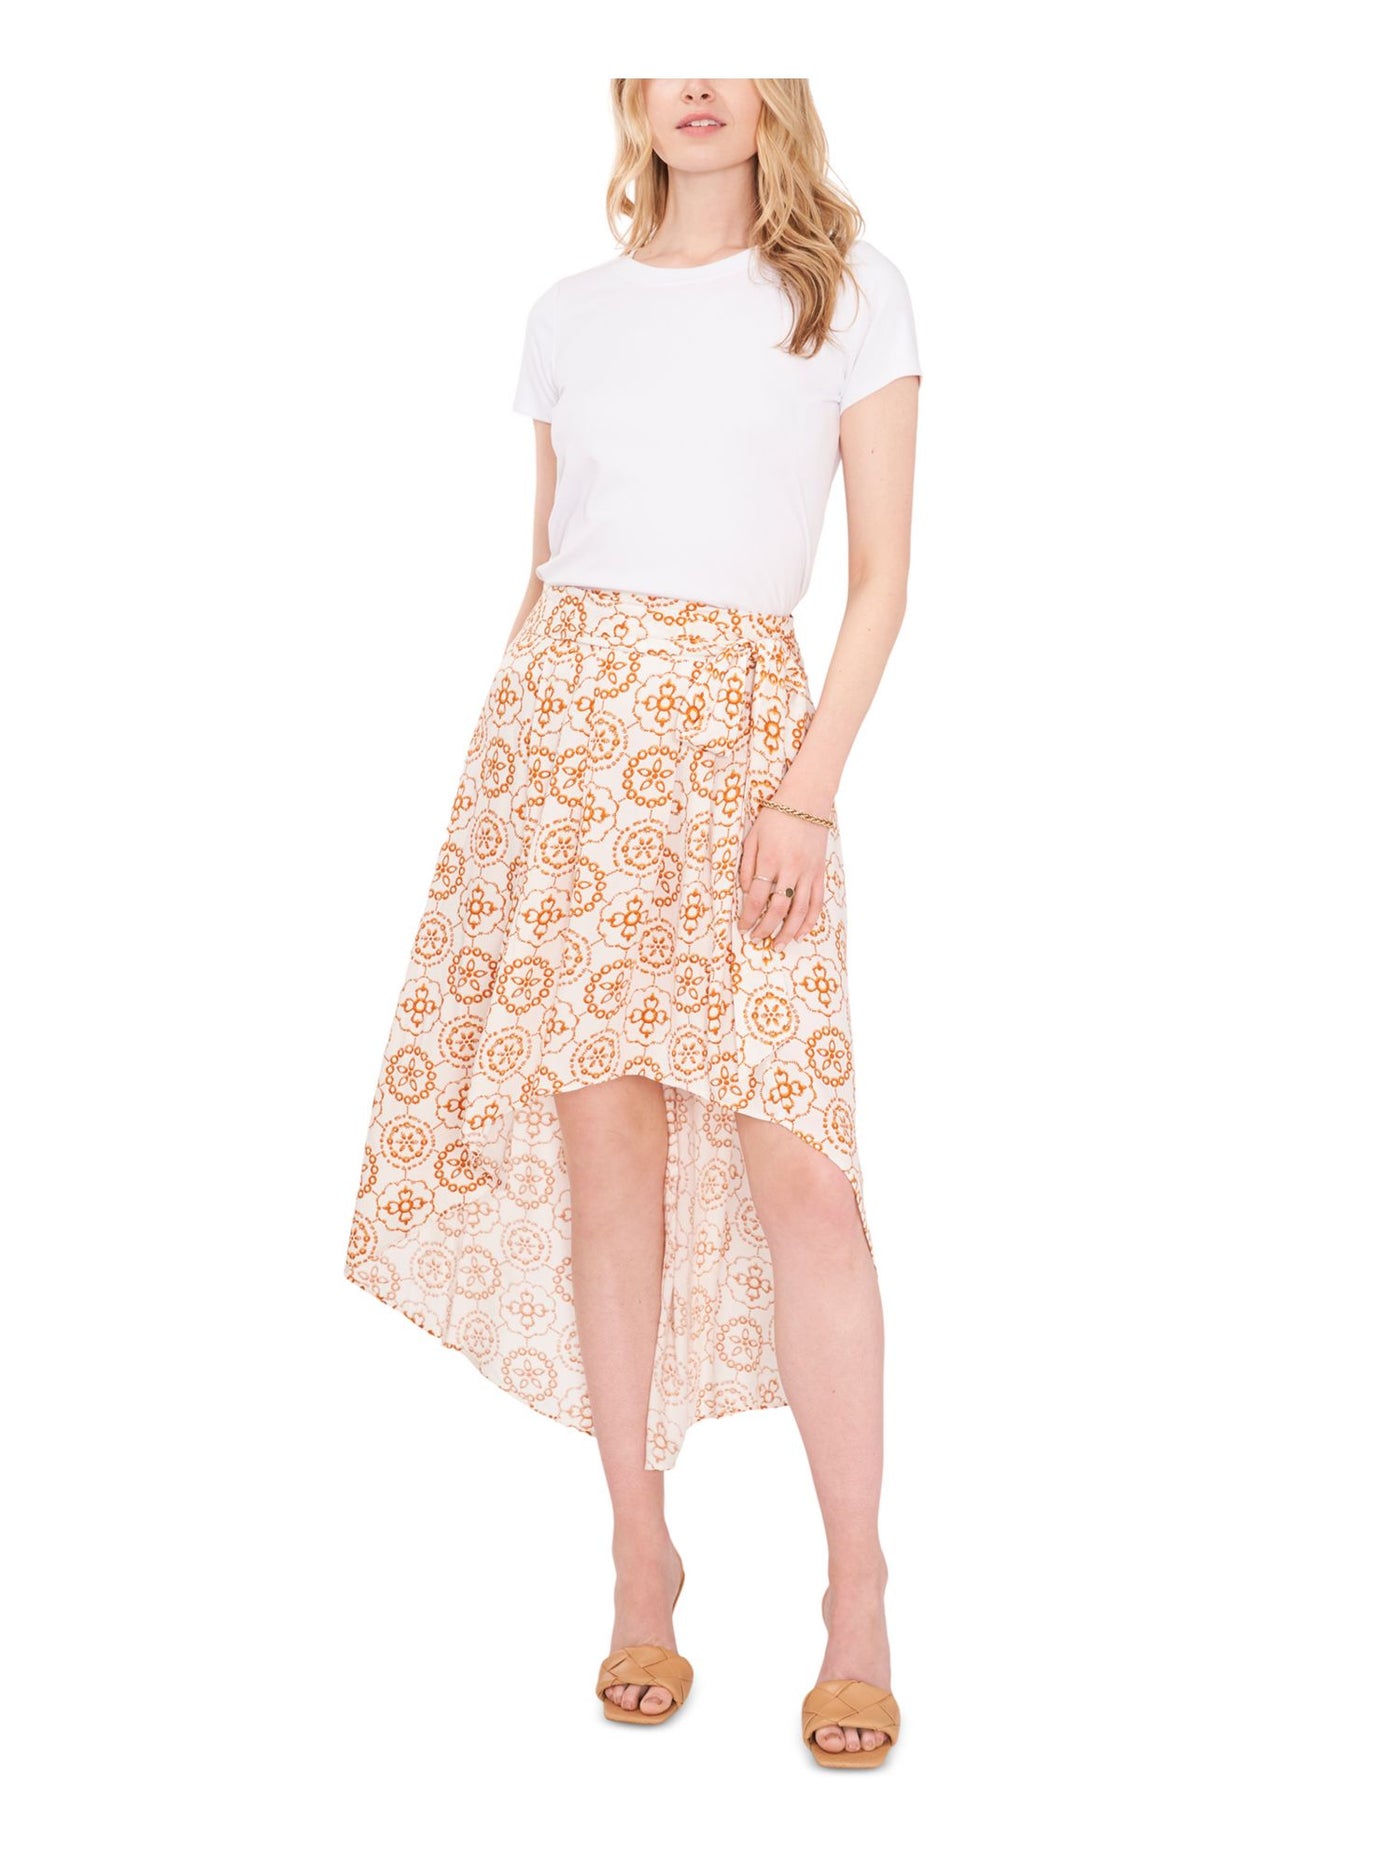 VINCE CAMUTO Womens Ivory Printed Above The Knee Hi-Lo Skirt S